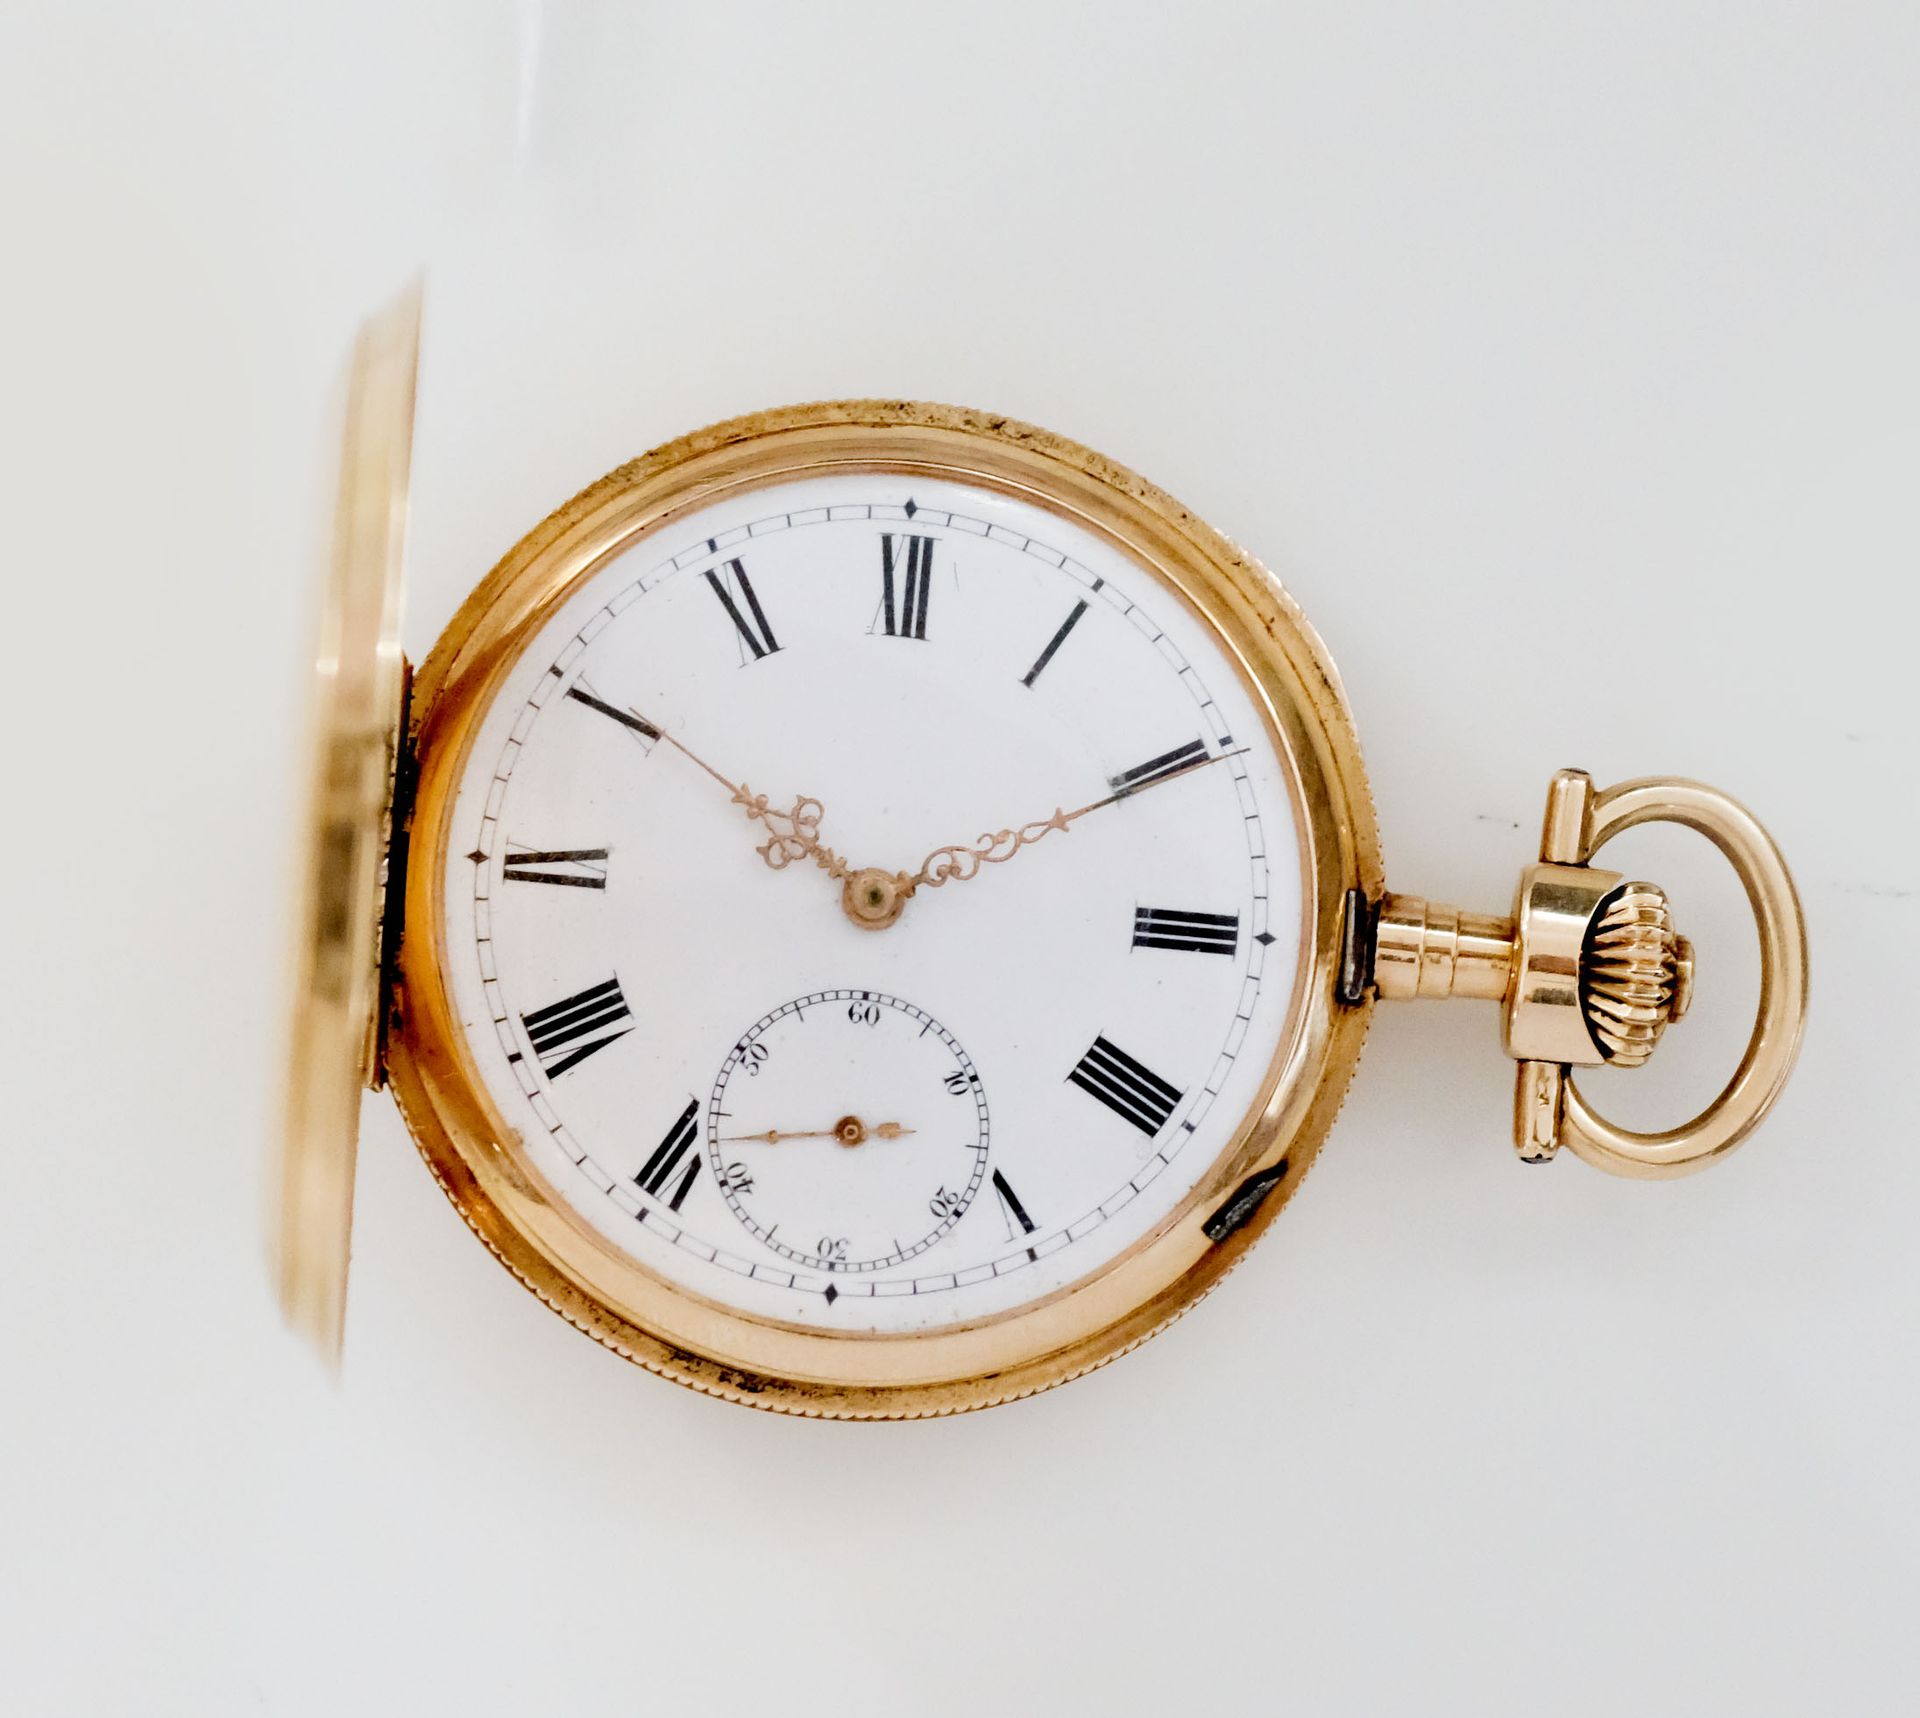 ANONYME vers 1900 
N° 502011
14k (585) gold savonnette type pocket watch, white &hellip;